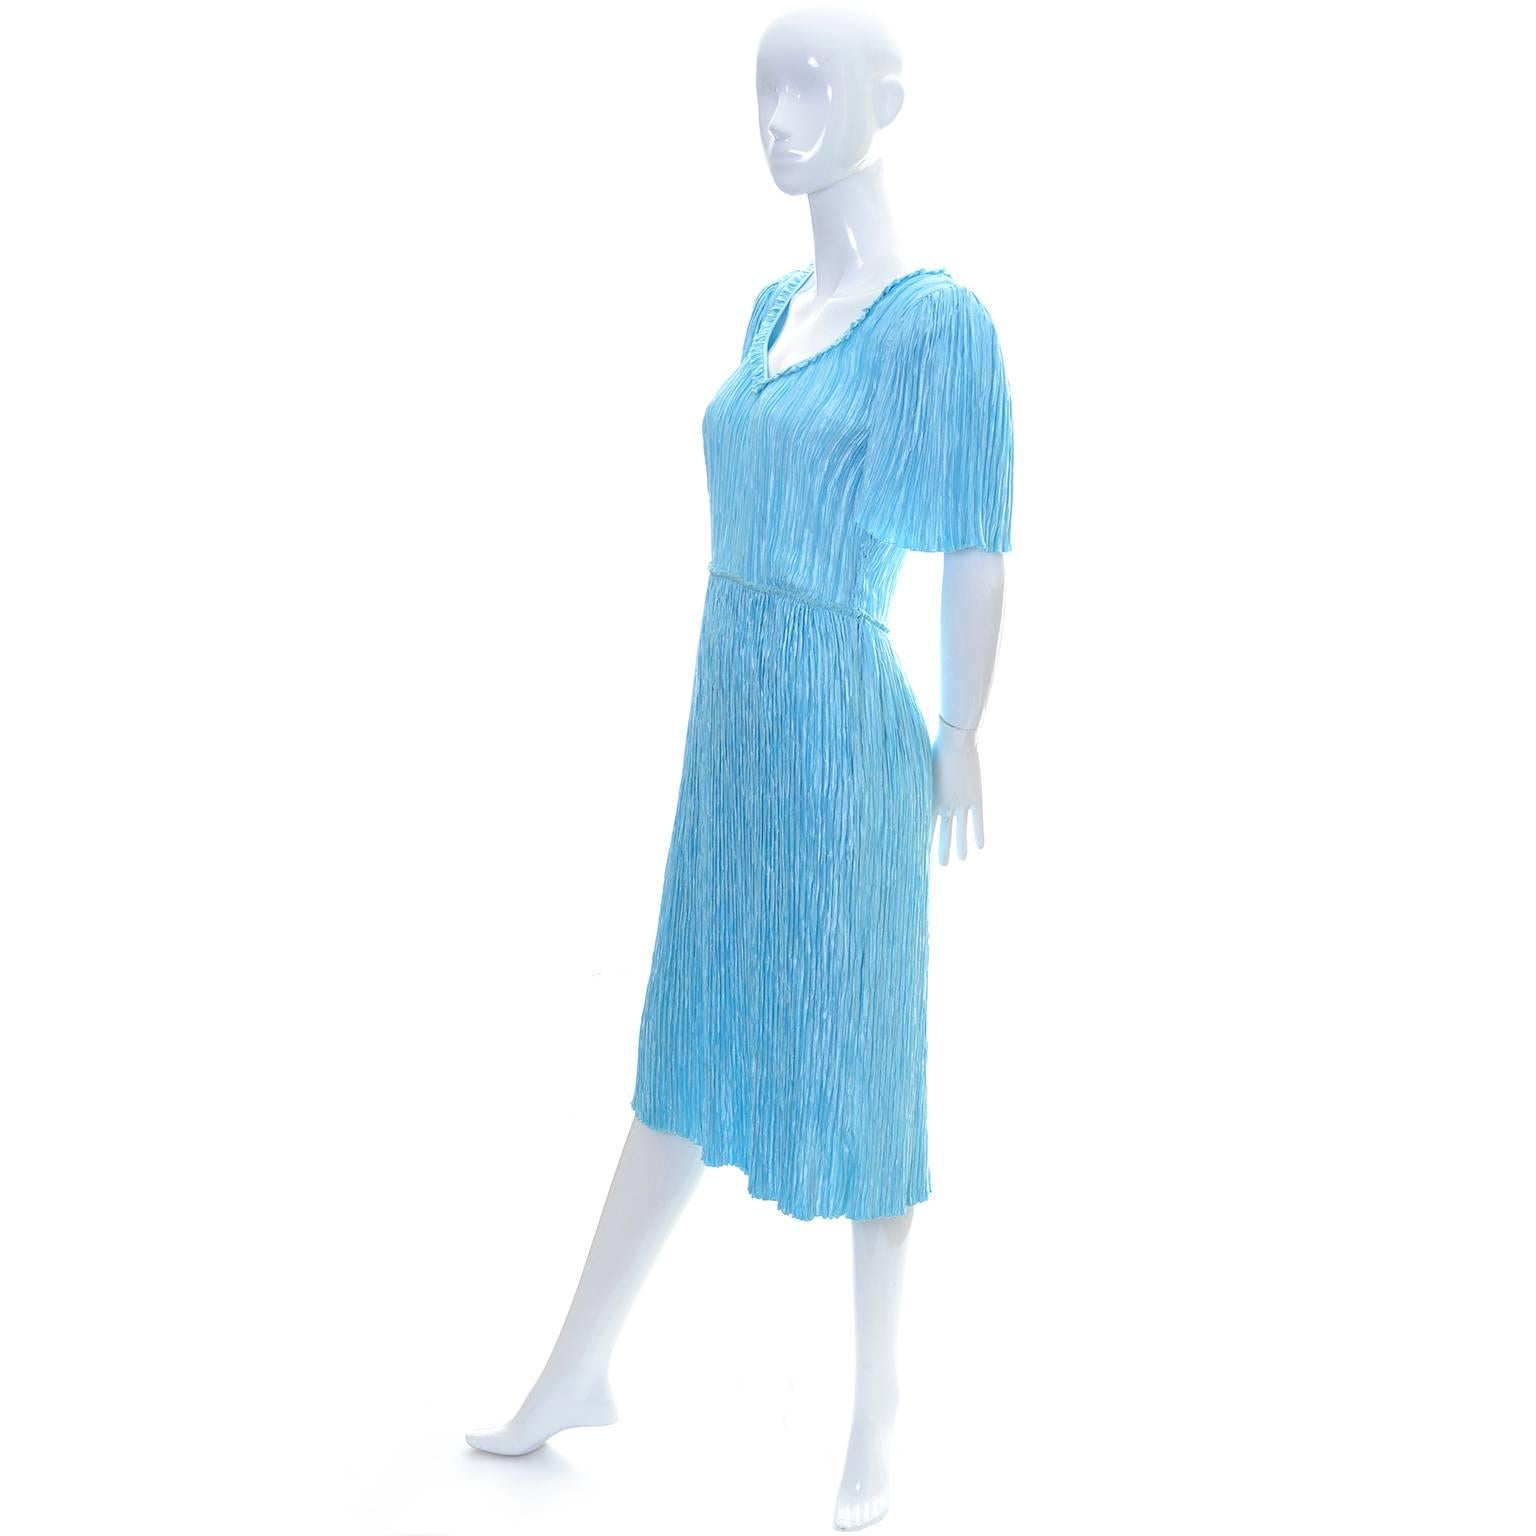 Women's Mary McFadden Couture Vintage Dress Blue Fortuny Style Pleats in Size 4